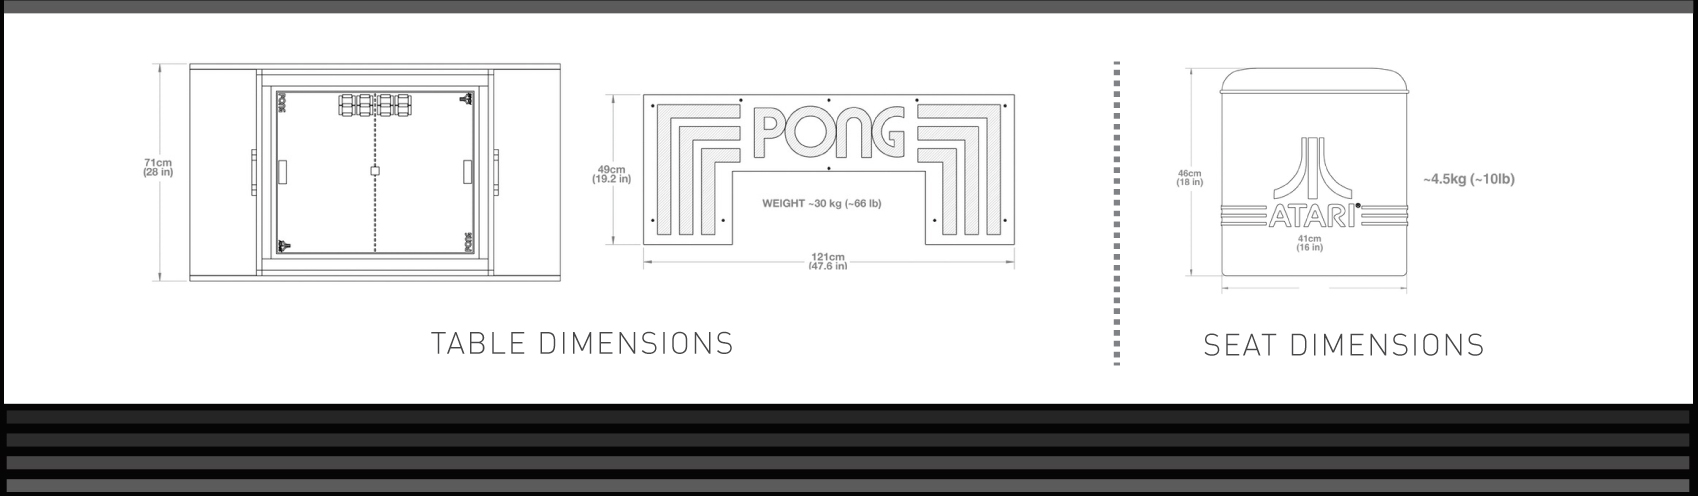 pong table demesions